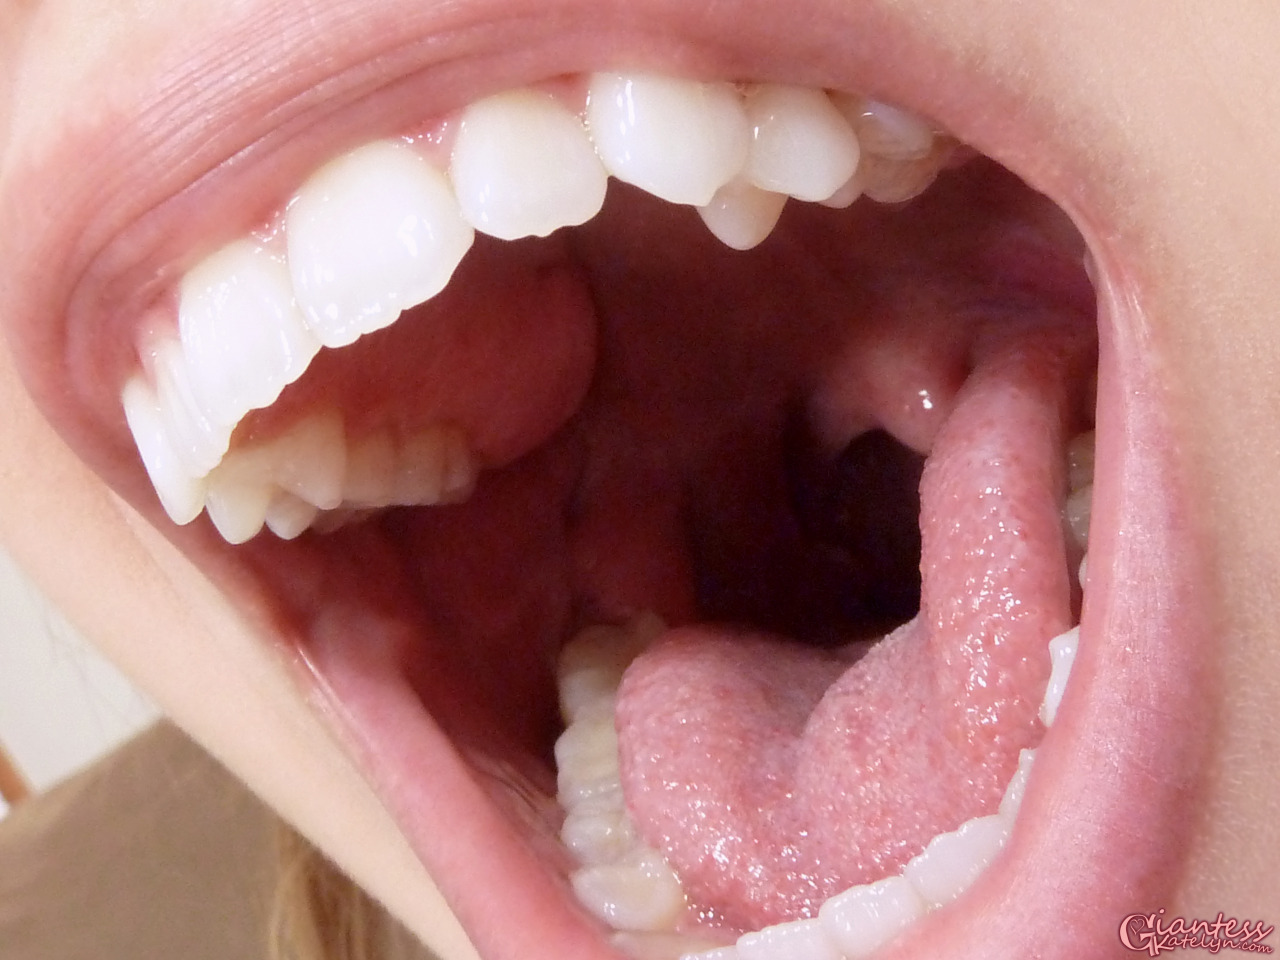 Katelyn Brooks showing the inside of her mouth